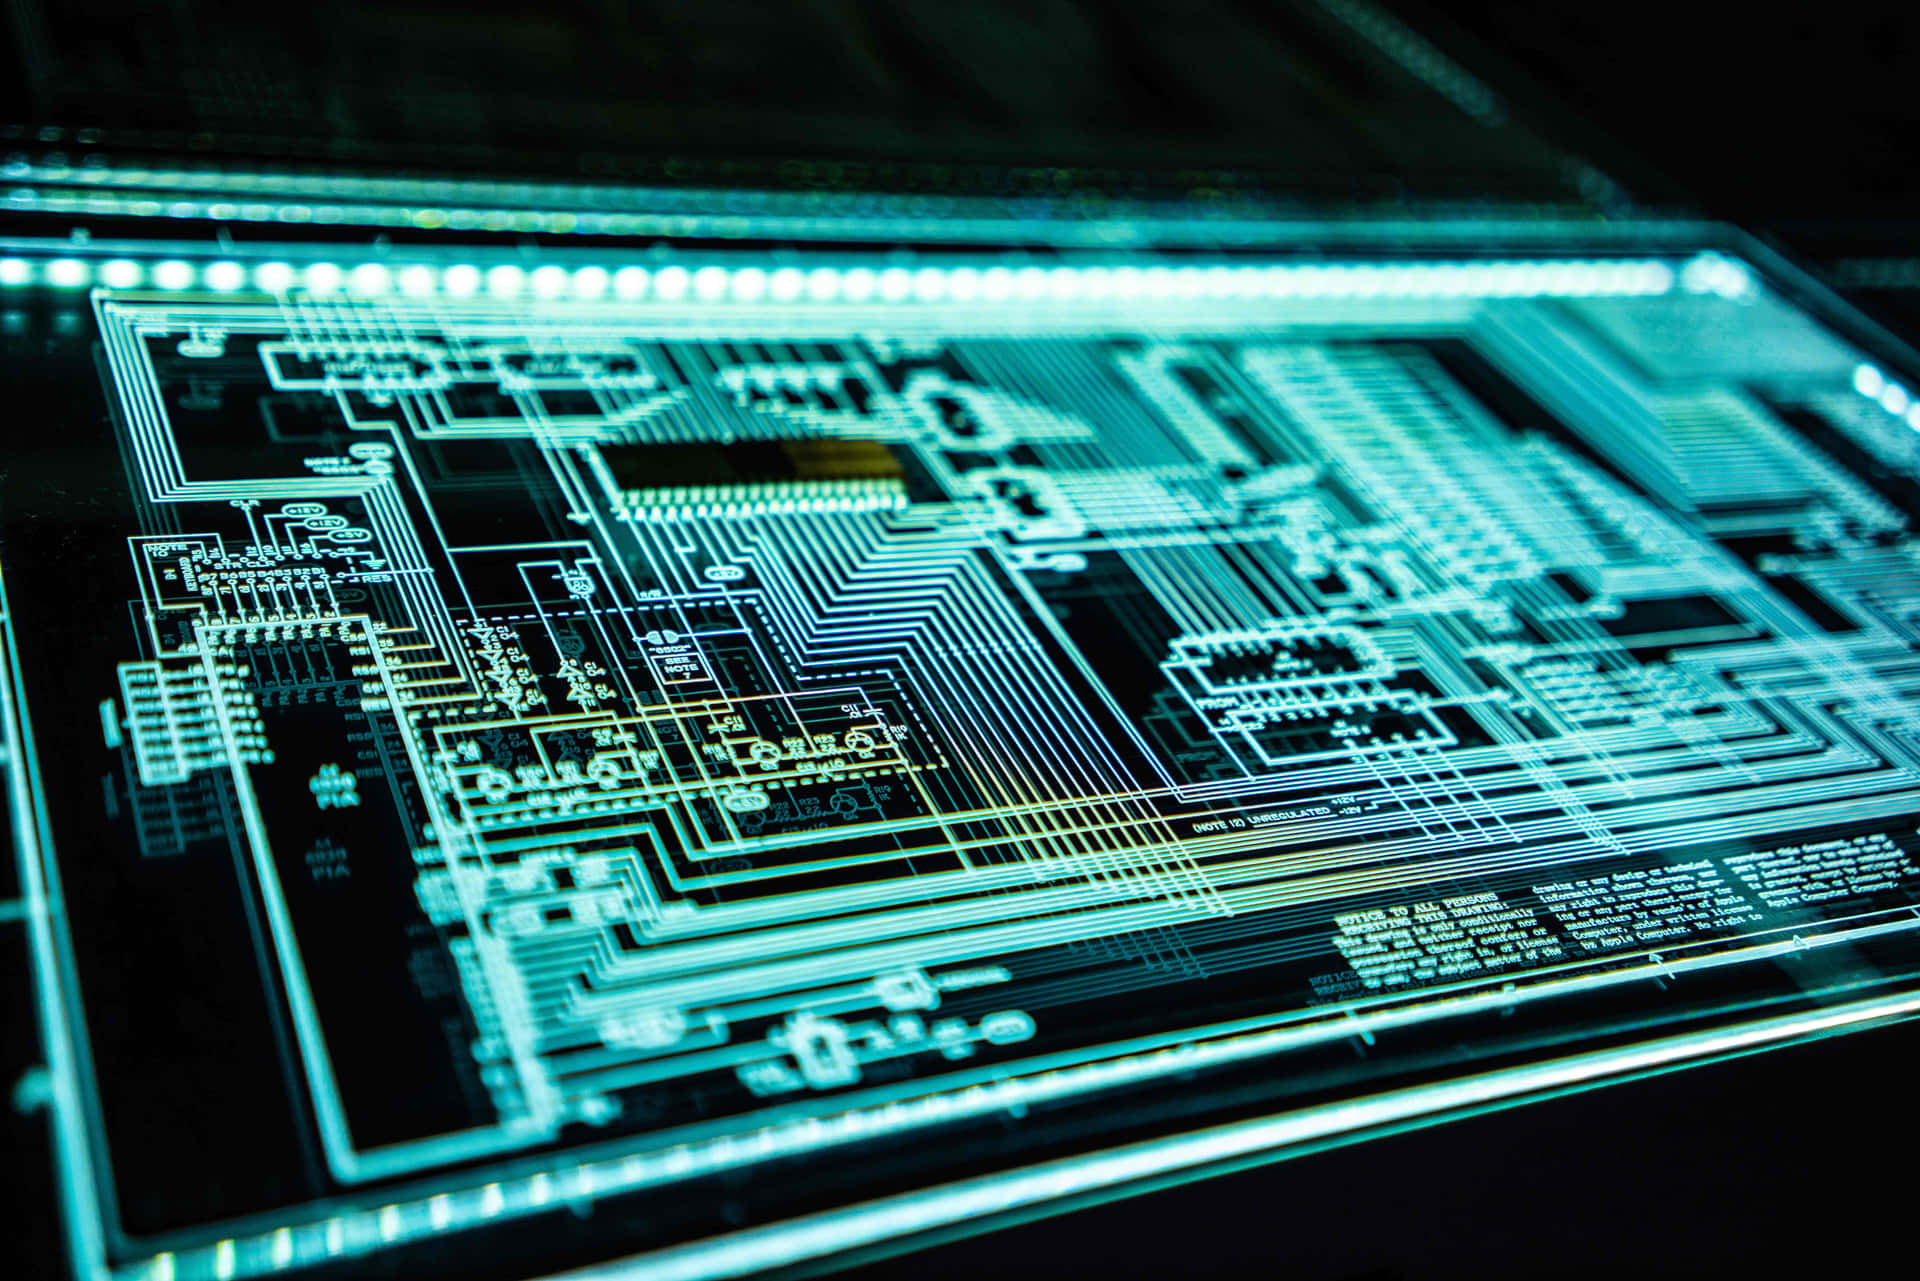 Cyan Lighted Printed Circuit Board Technology Background